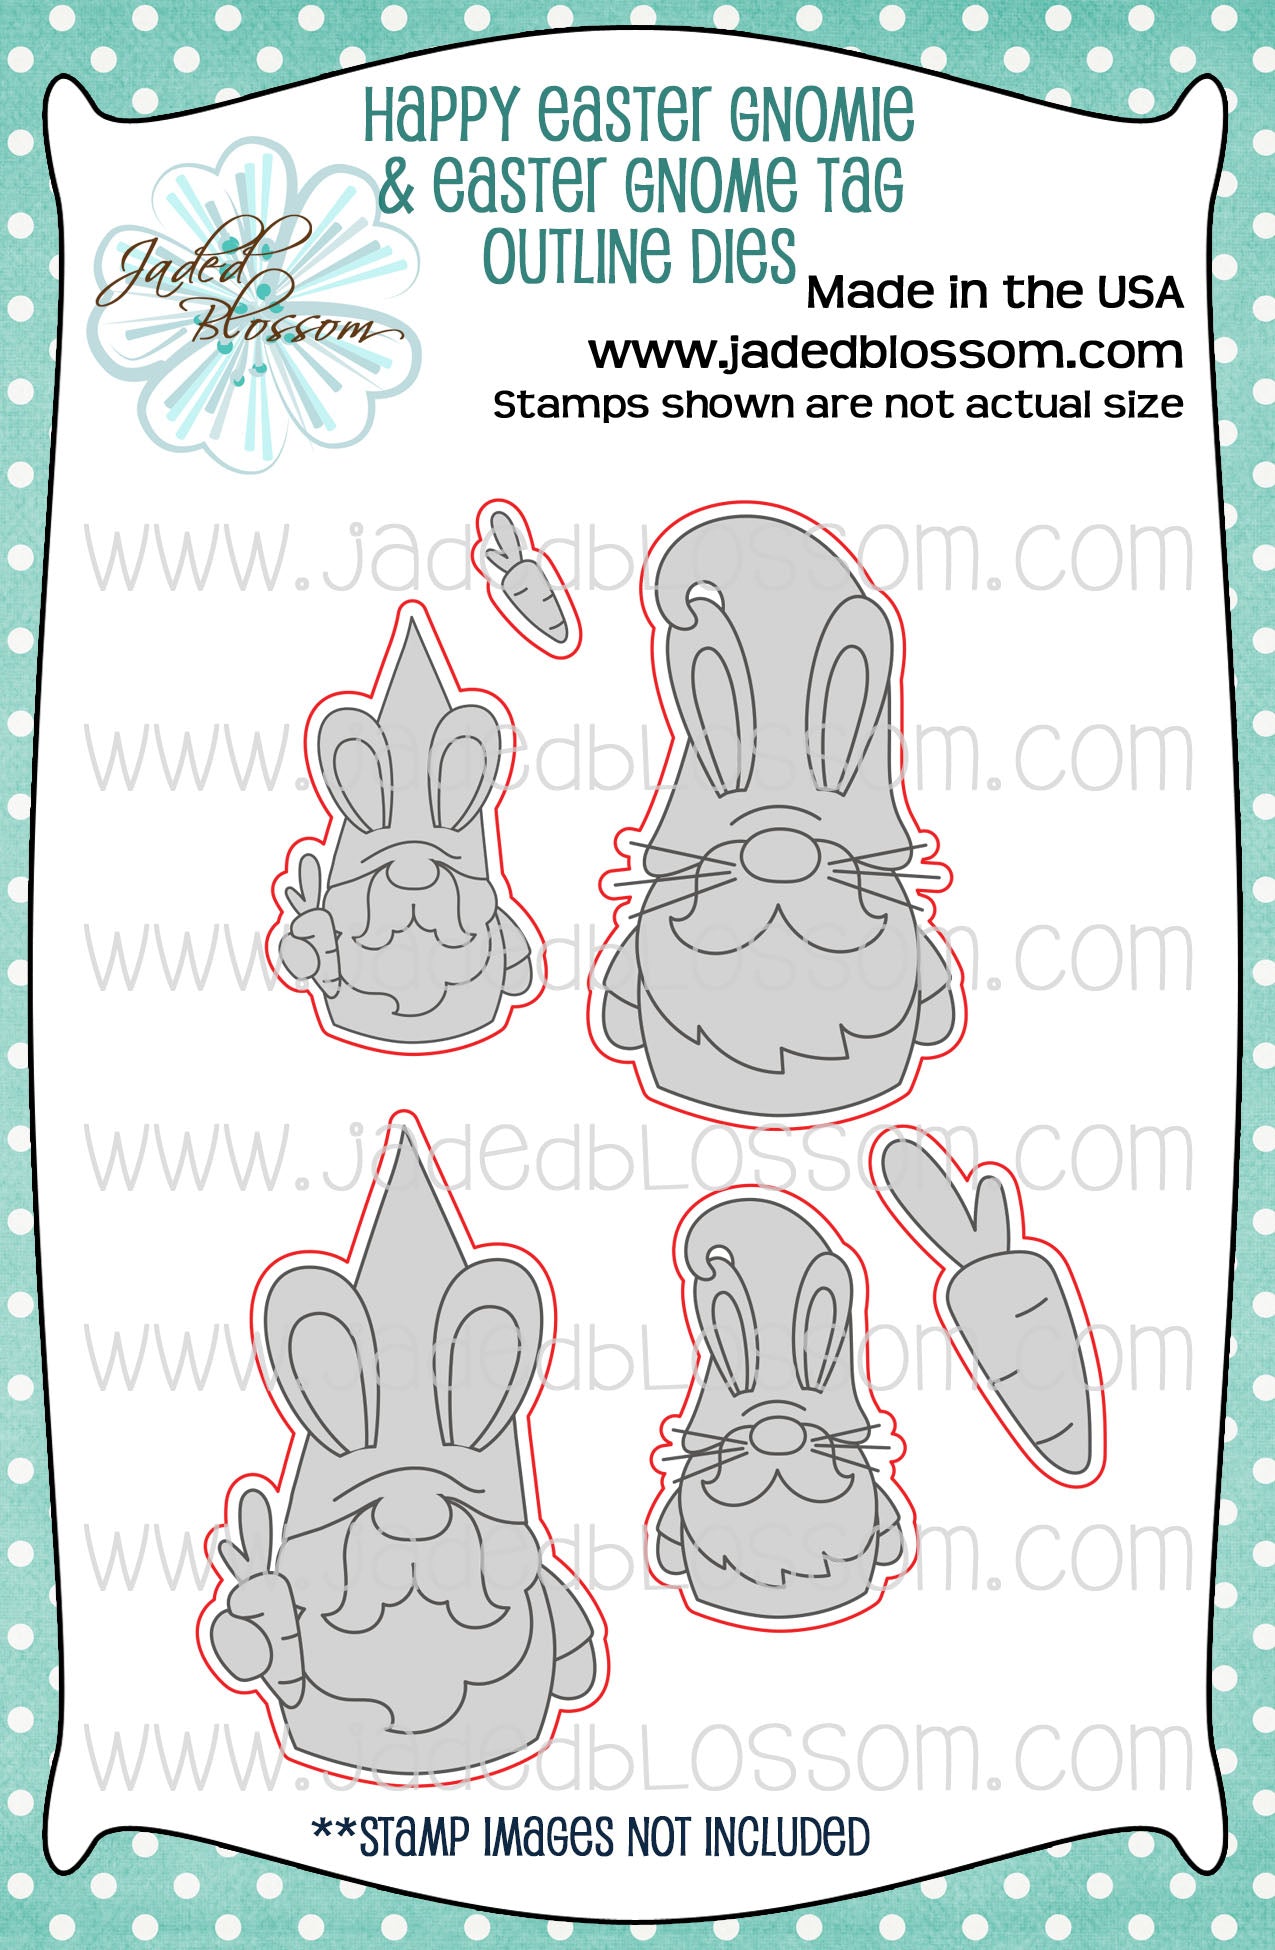 Happy Easter Gnomie & Easter Gnome Tag Outline Dies